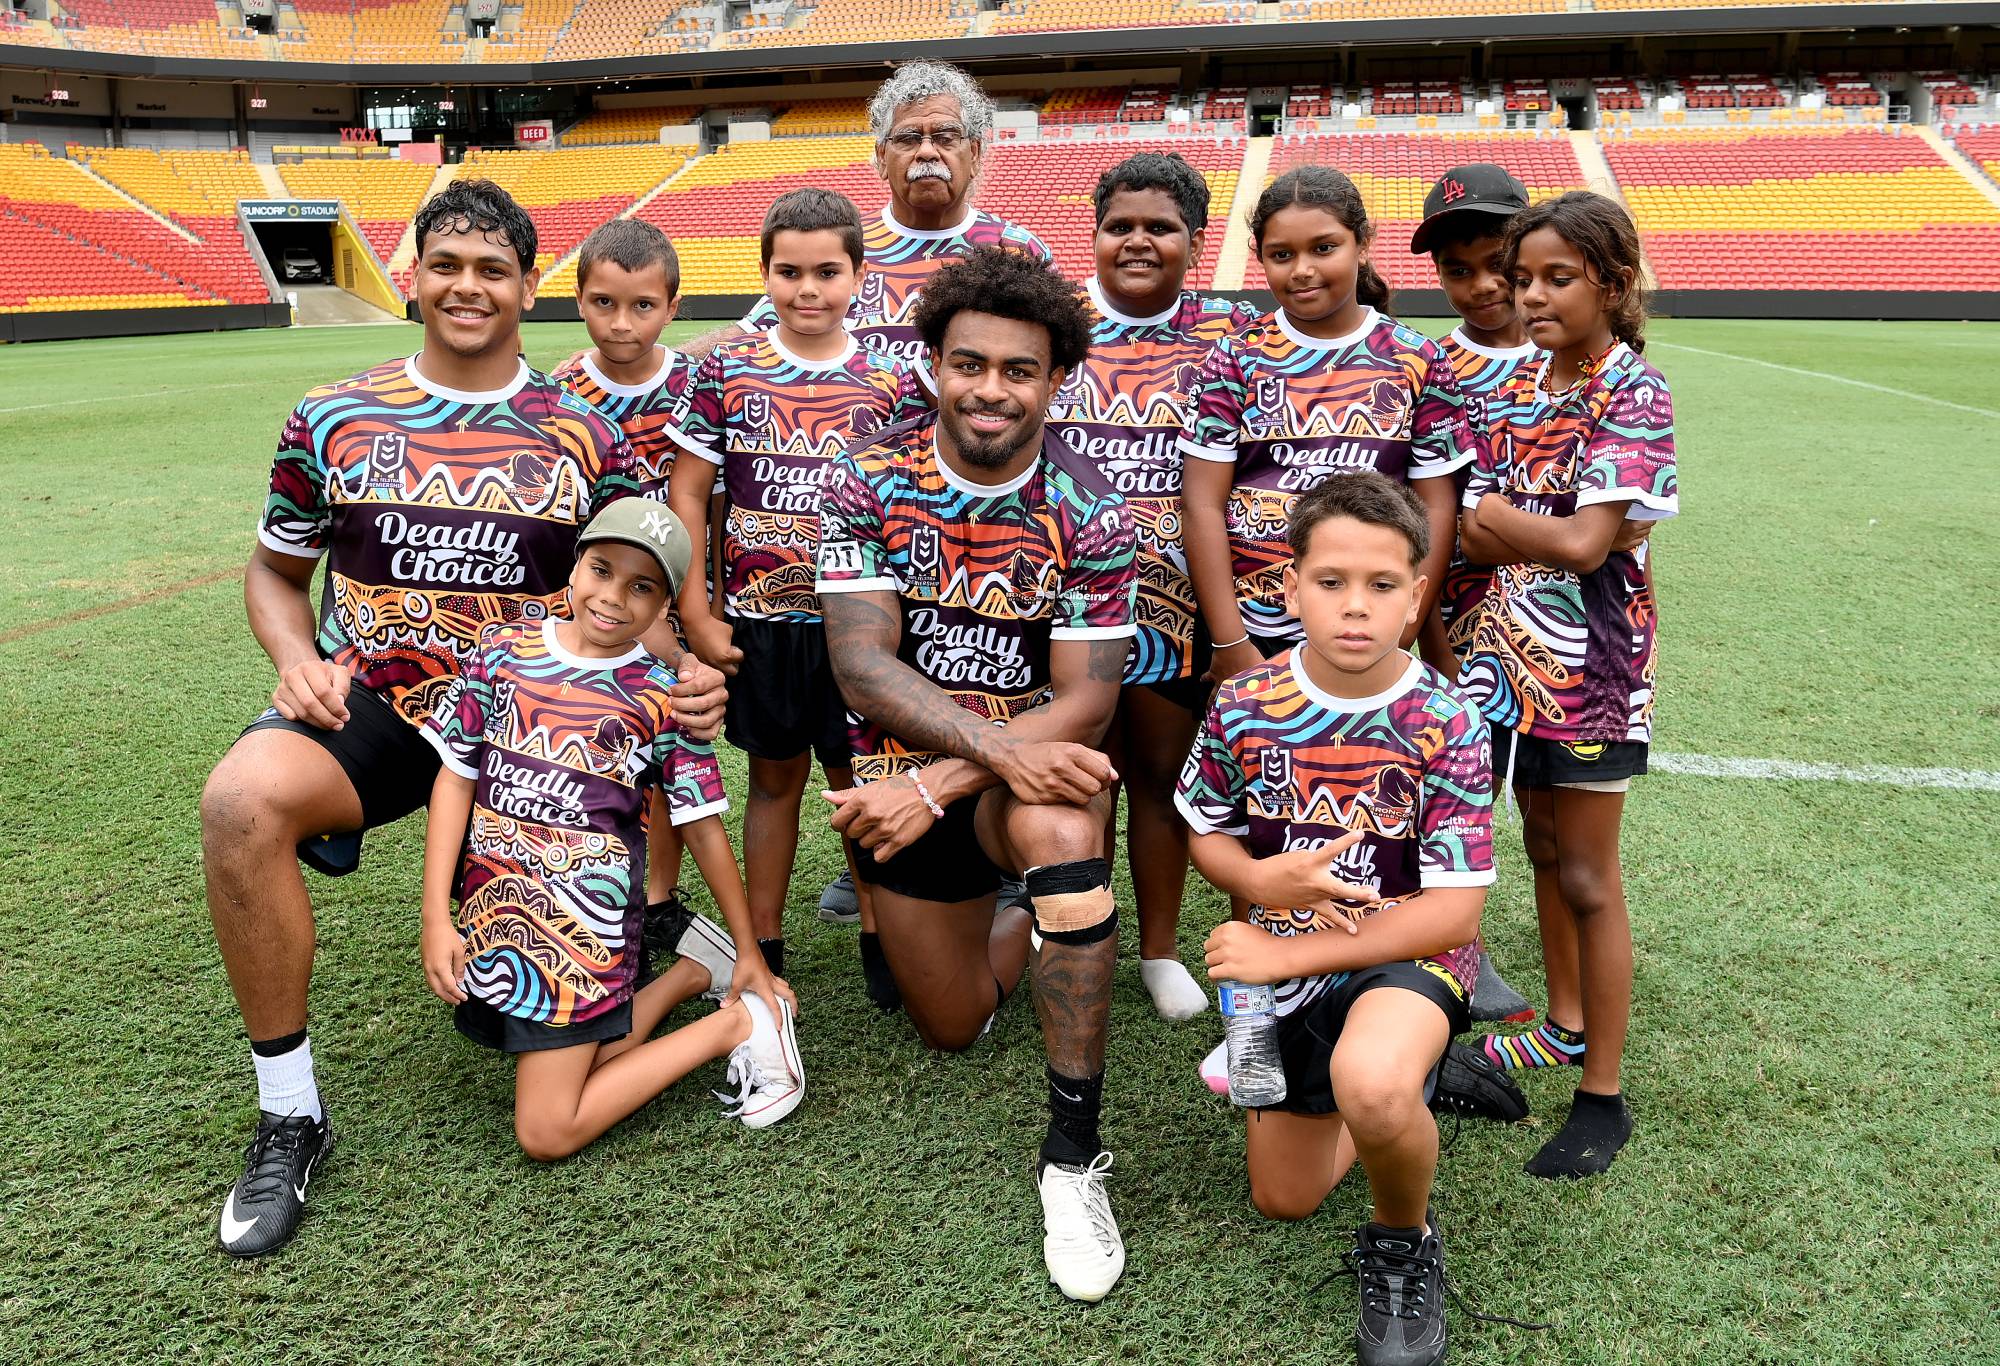 Broncos players Ezra Mam and Selwyn Cobbo with a group of young Indigenous kids after a Brisbane Broncos NRL training session at Suncorp Stadium on Monday. (Photo by Bradley Kanaris/Getty Images)